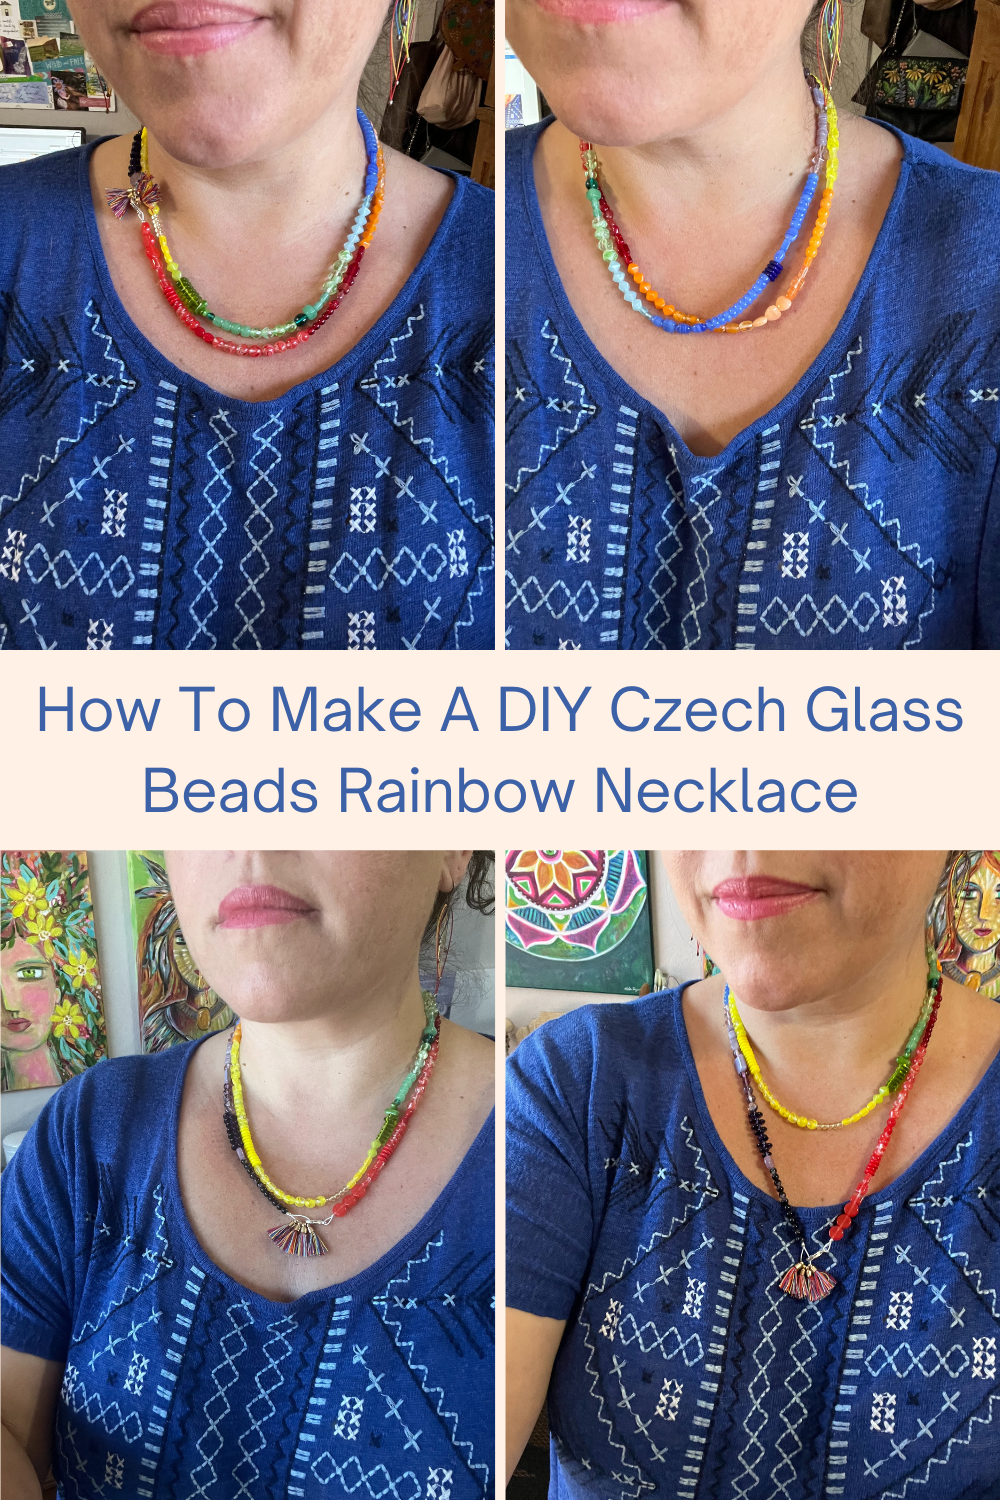 How To Make A DIY Czech Glass Beads Rainbow Necklace Collage